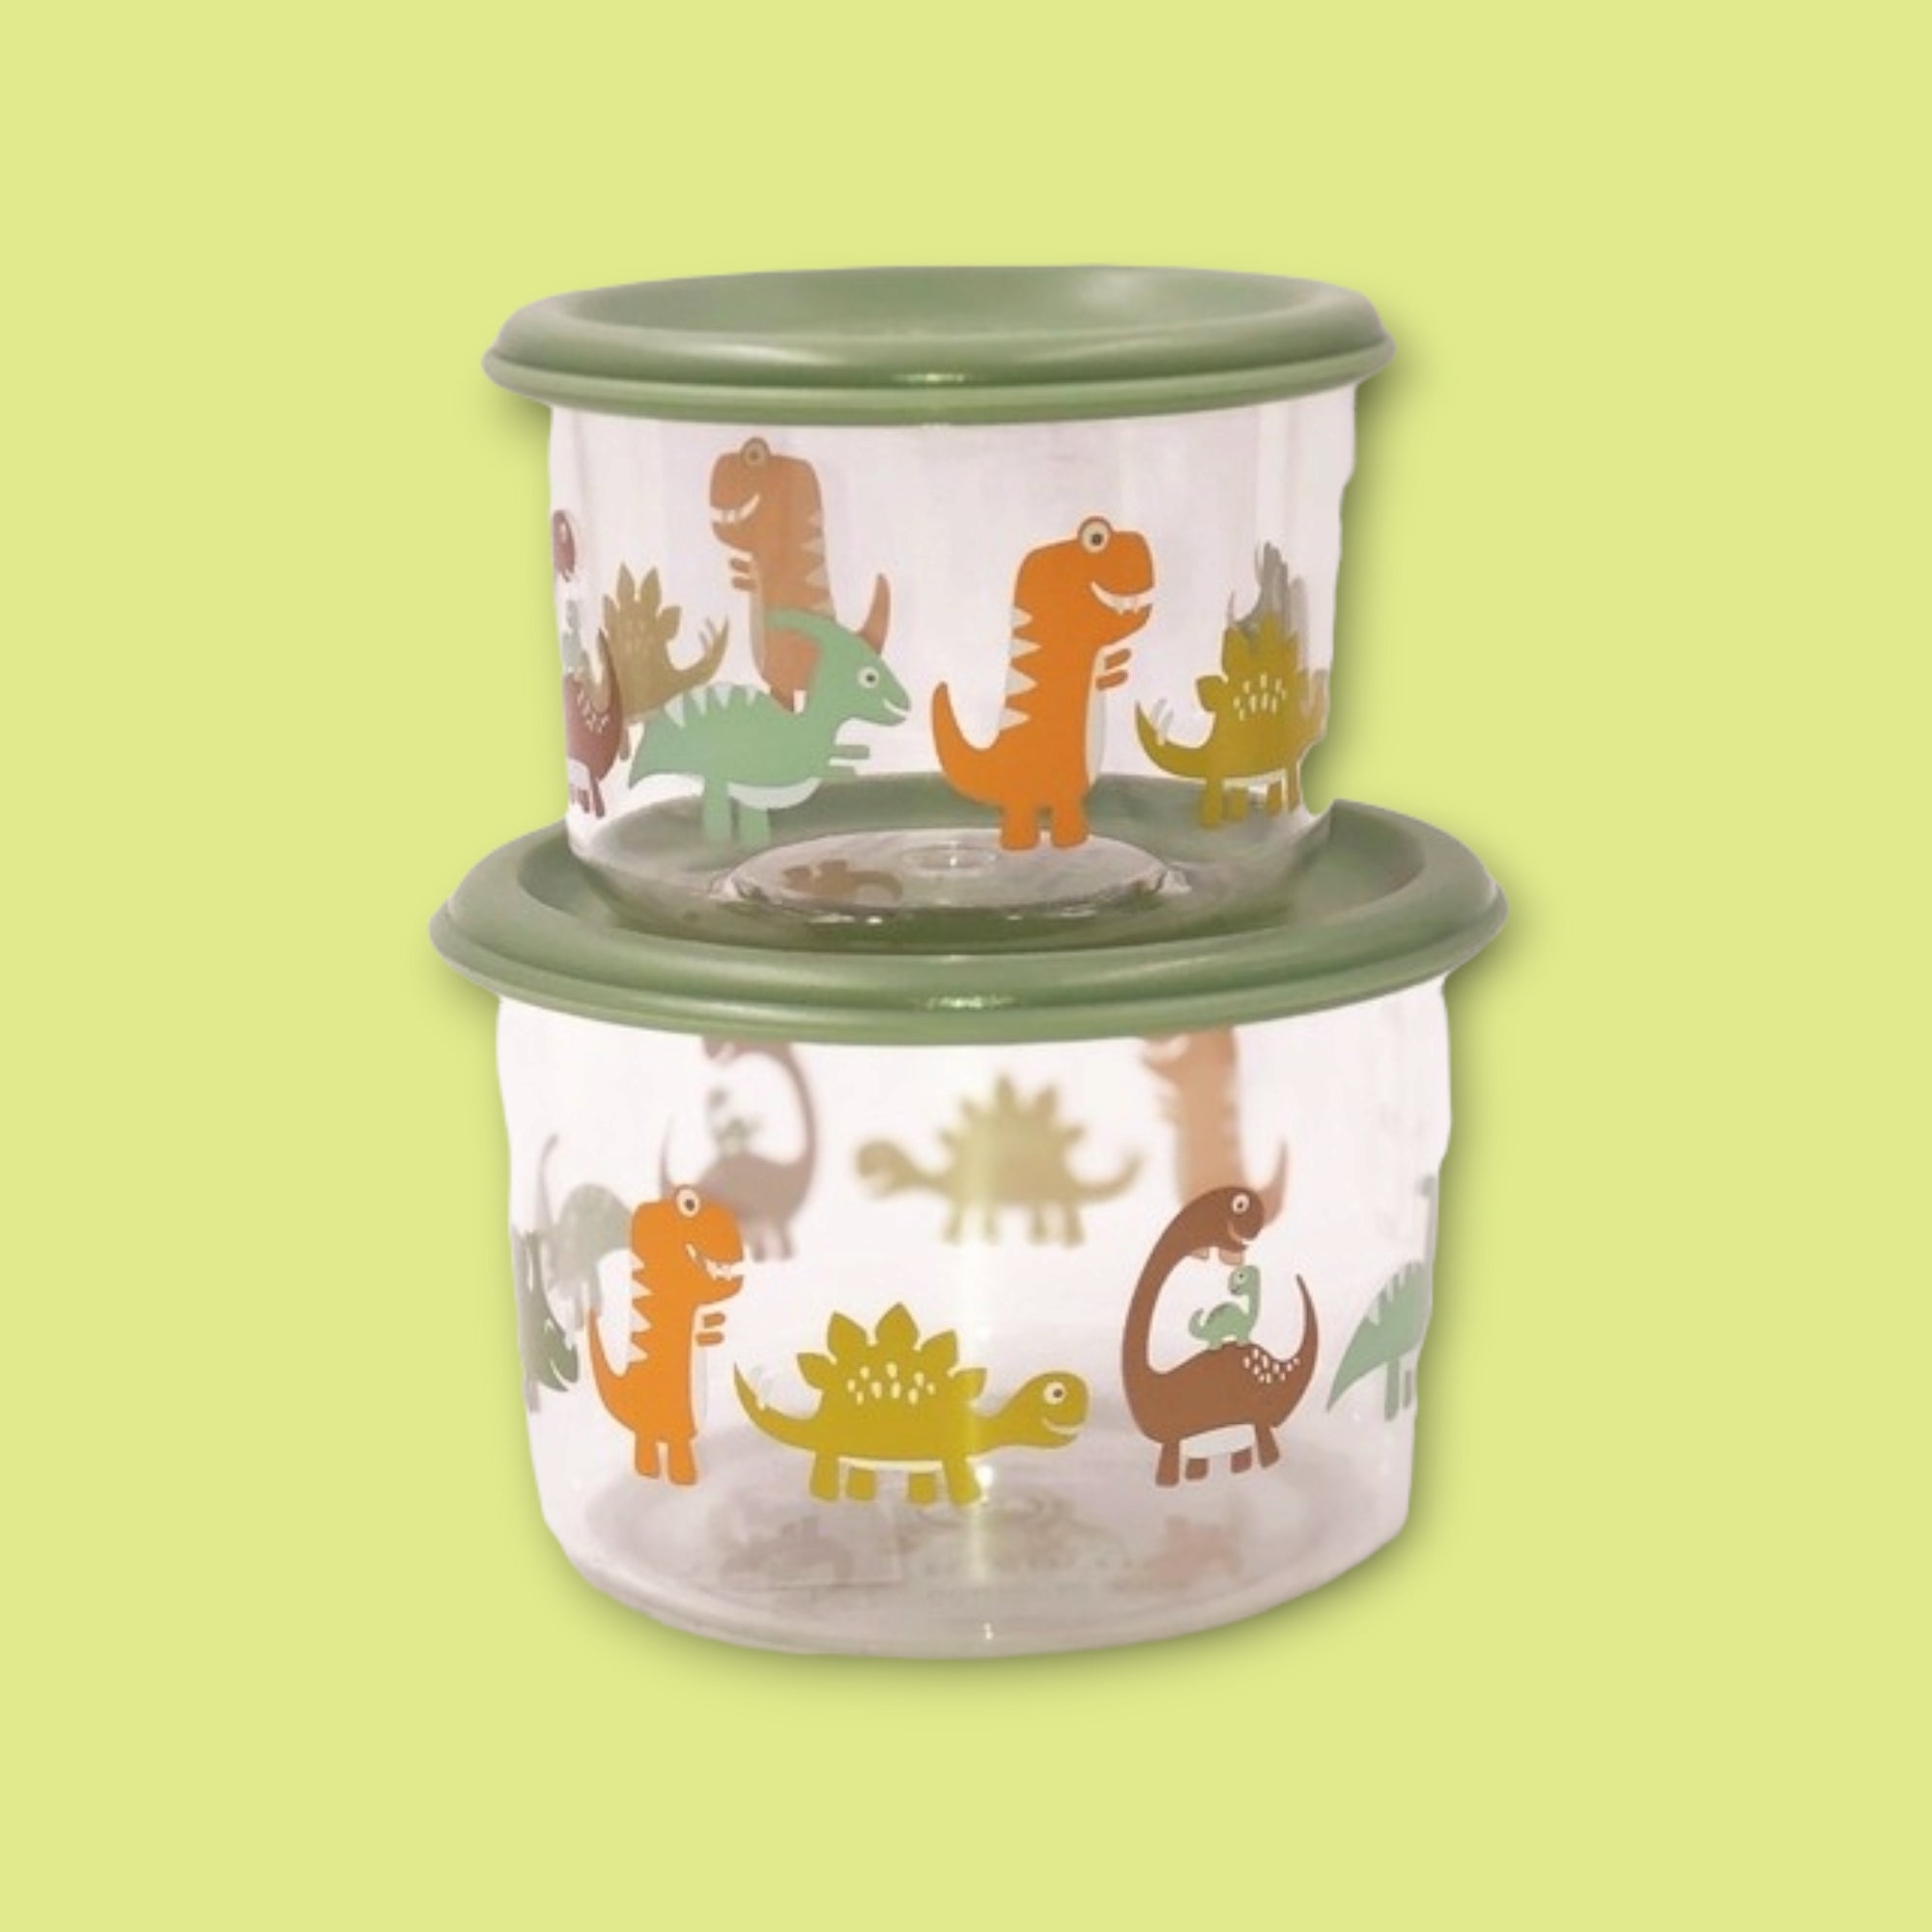 Sugarbooger 2stk Good Lunch Snack Containers